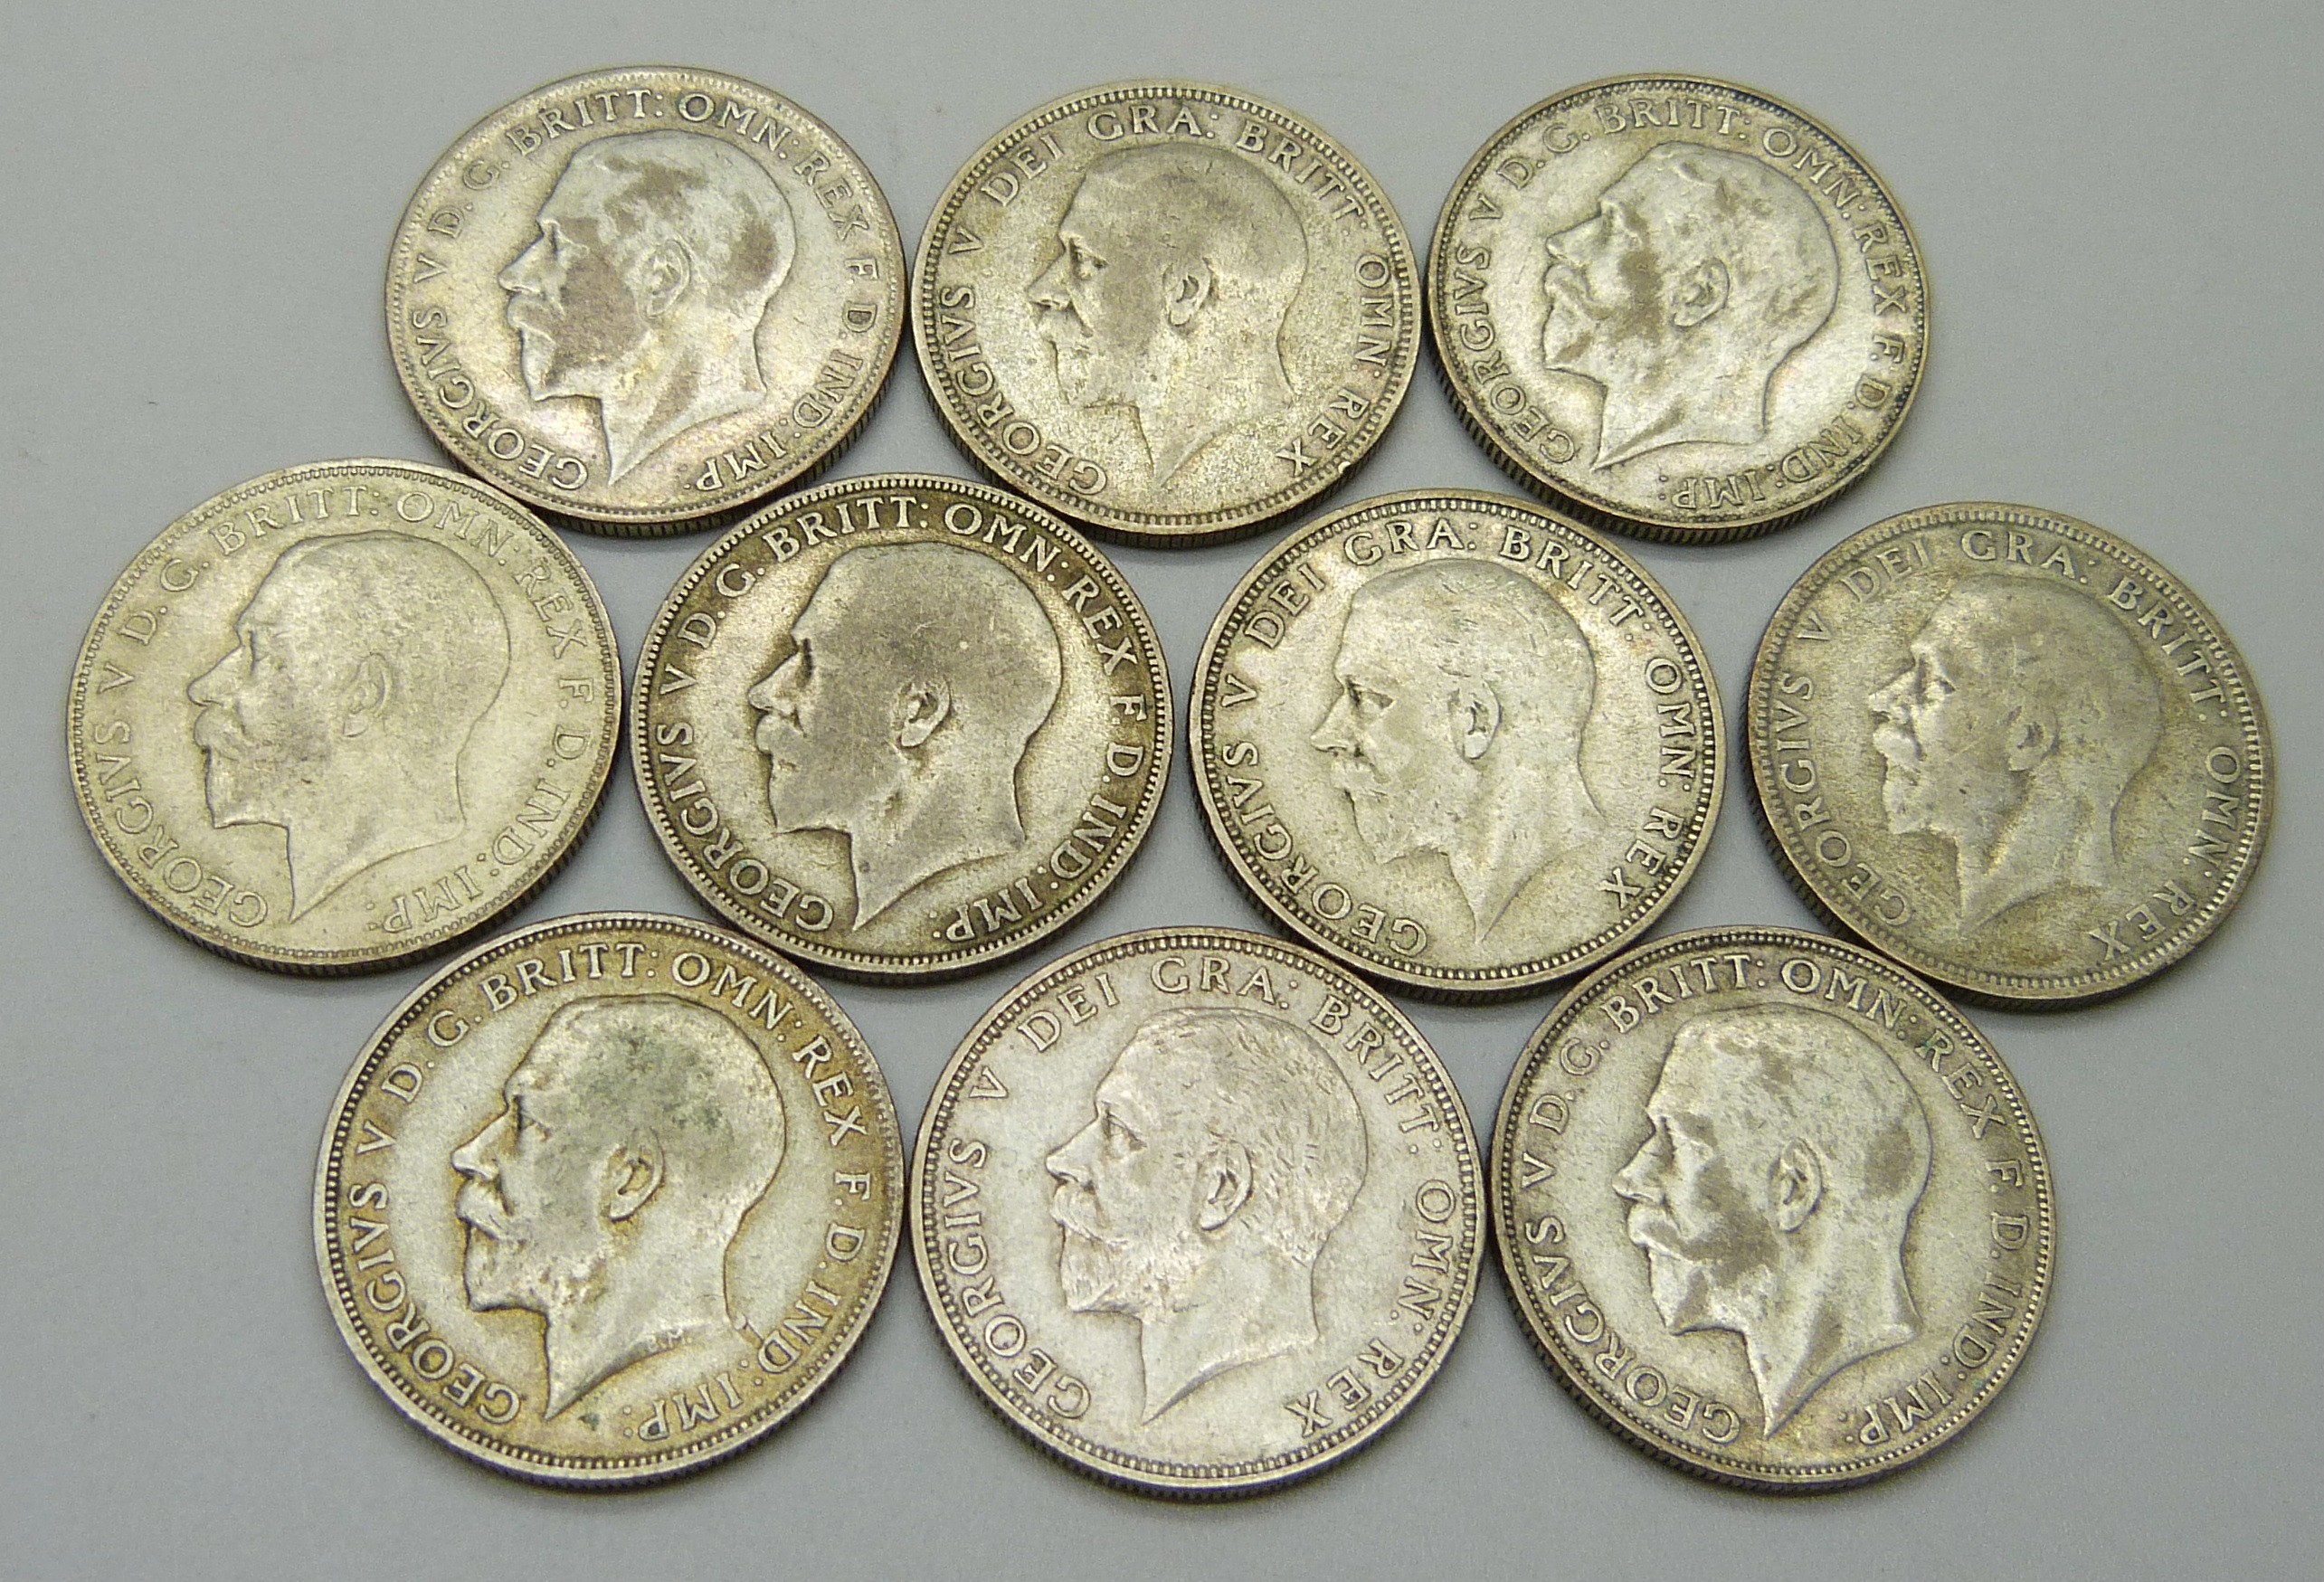 Coins; ten silver florins, (1920 to 1924, 1926, 1928 to 1931, rare dates 1924 and 1926), 112.1g